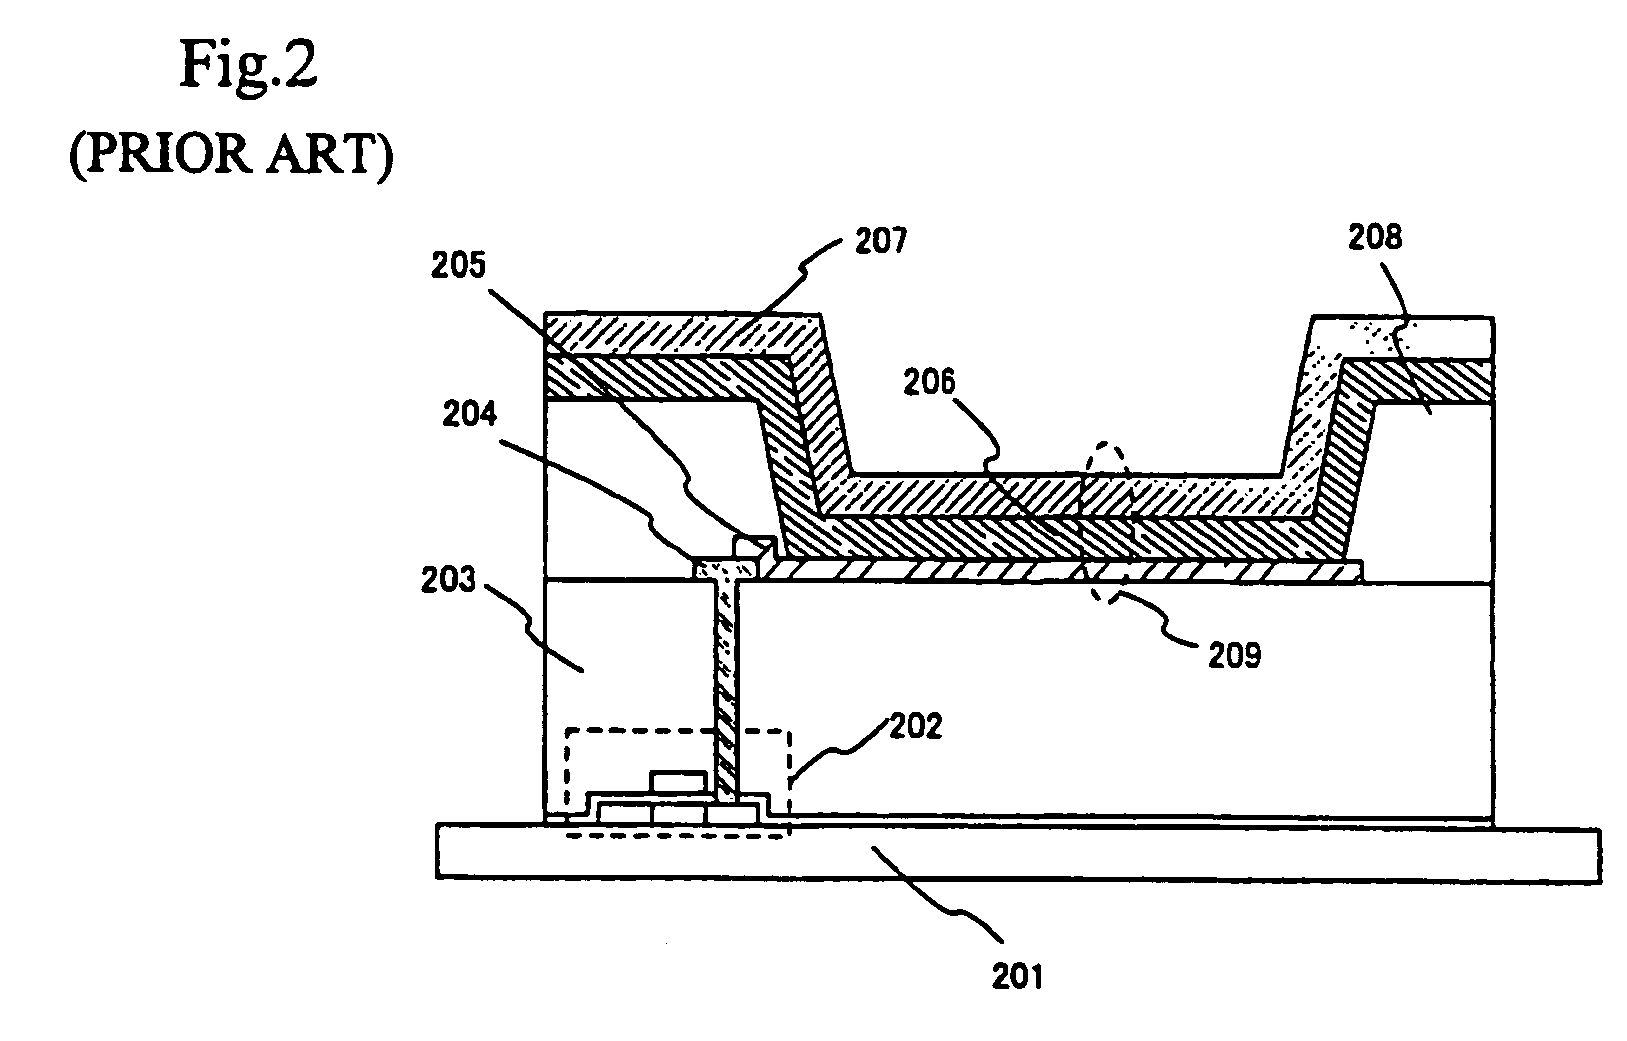 Light-emitting apparatus and method of manufacturing the same